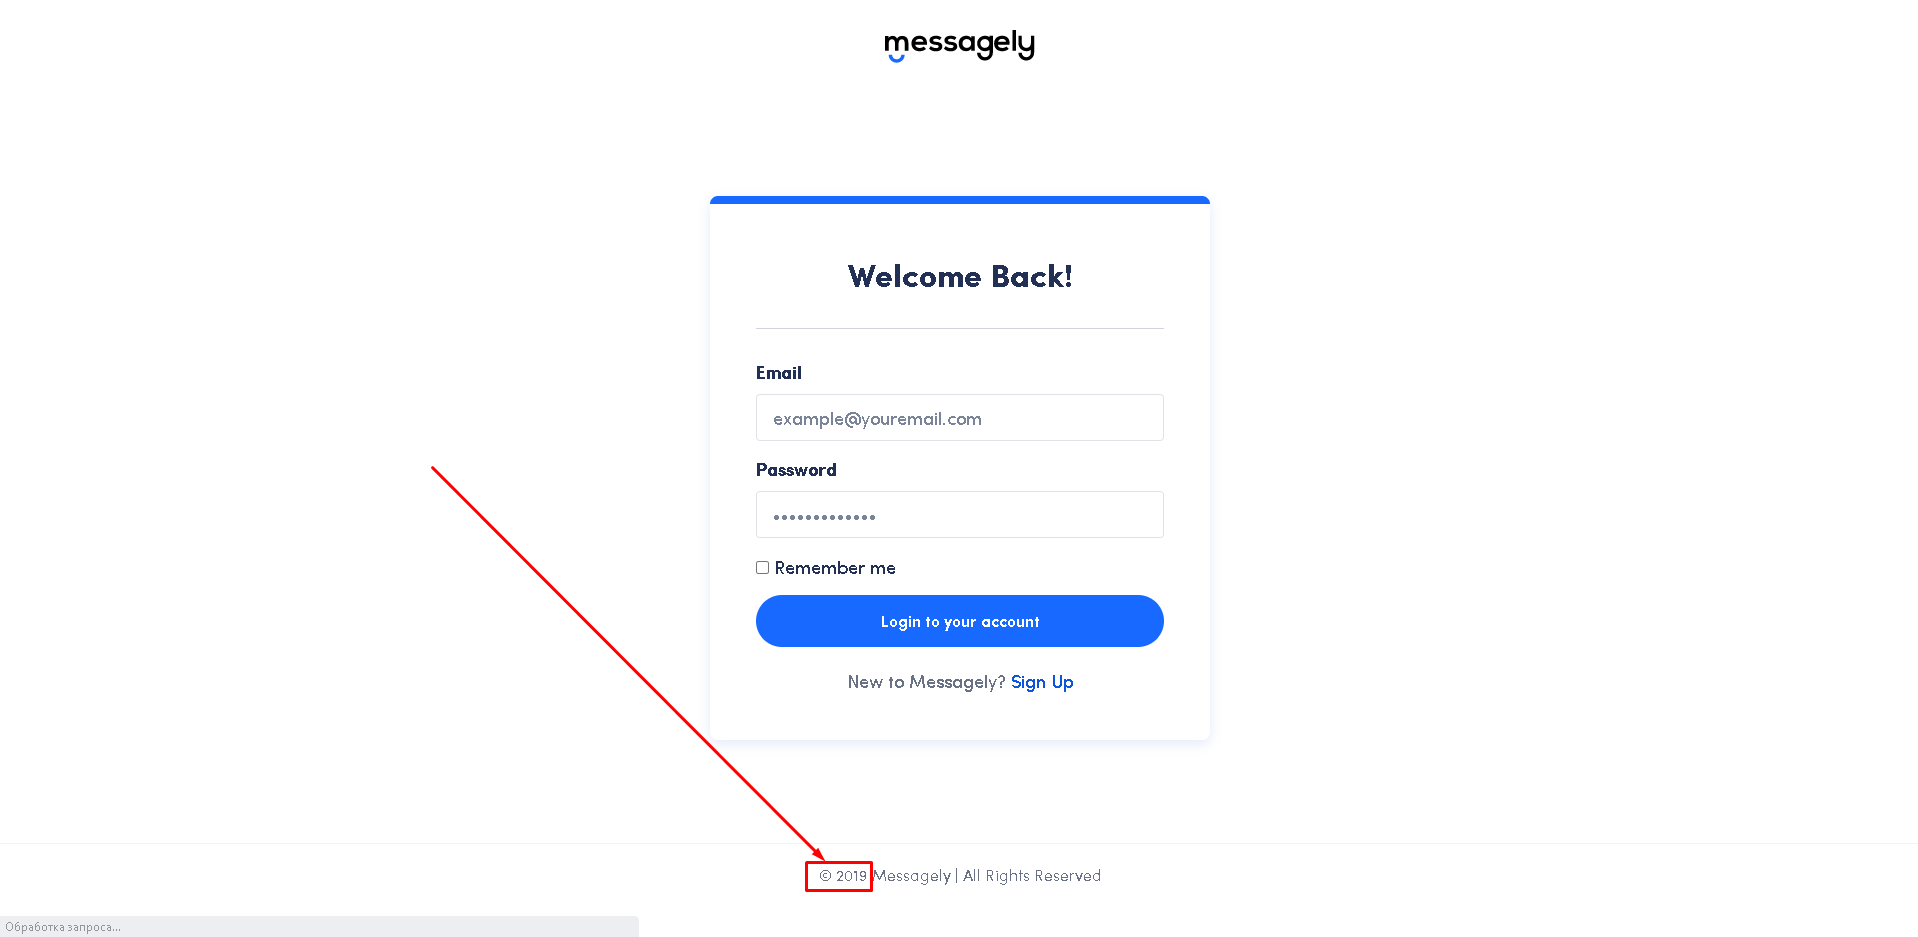 An irrelevant year is indicated in the footer of the “Login” window